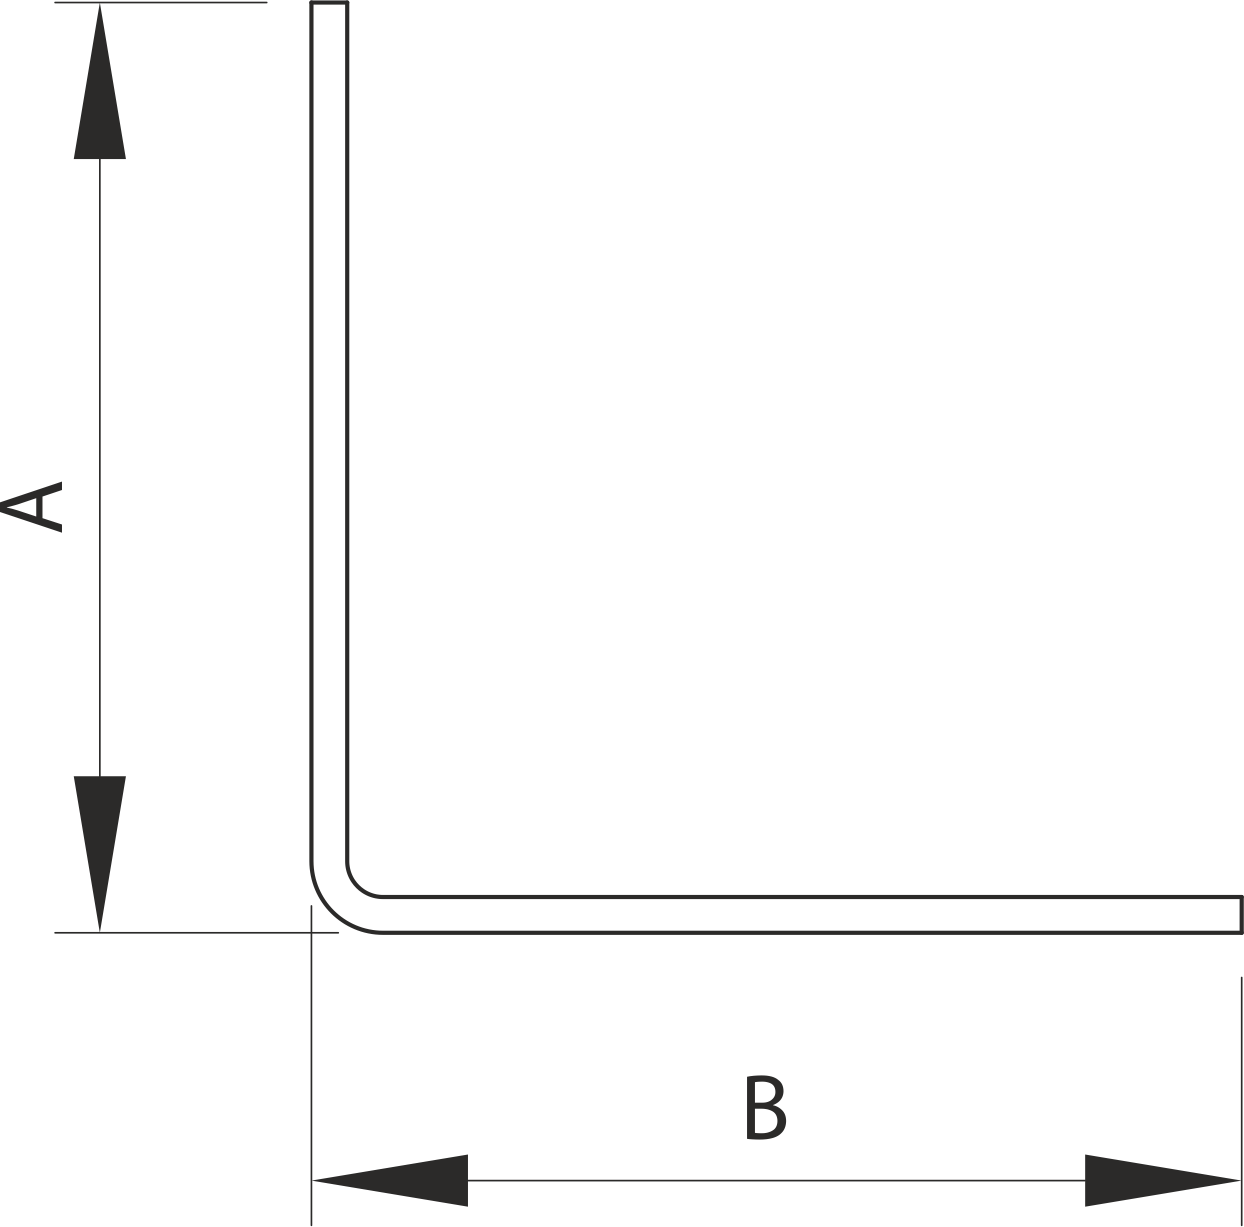 Auxiliary sections L